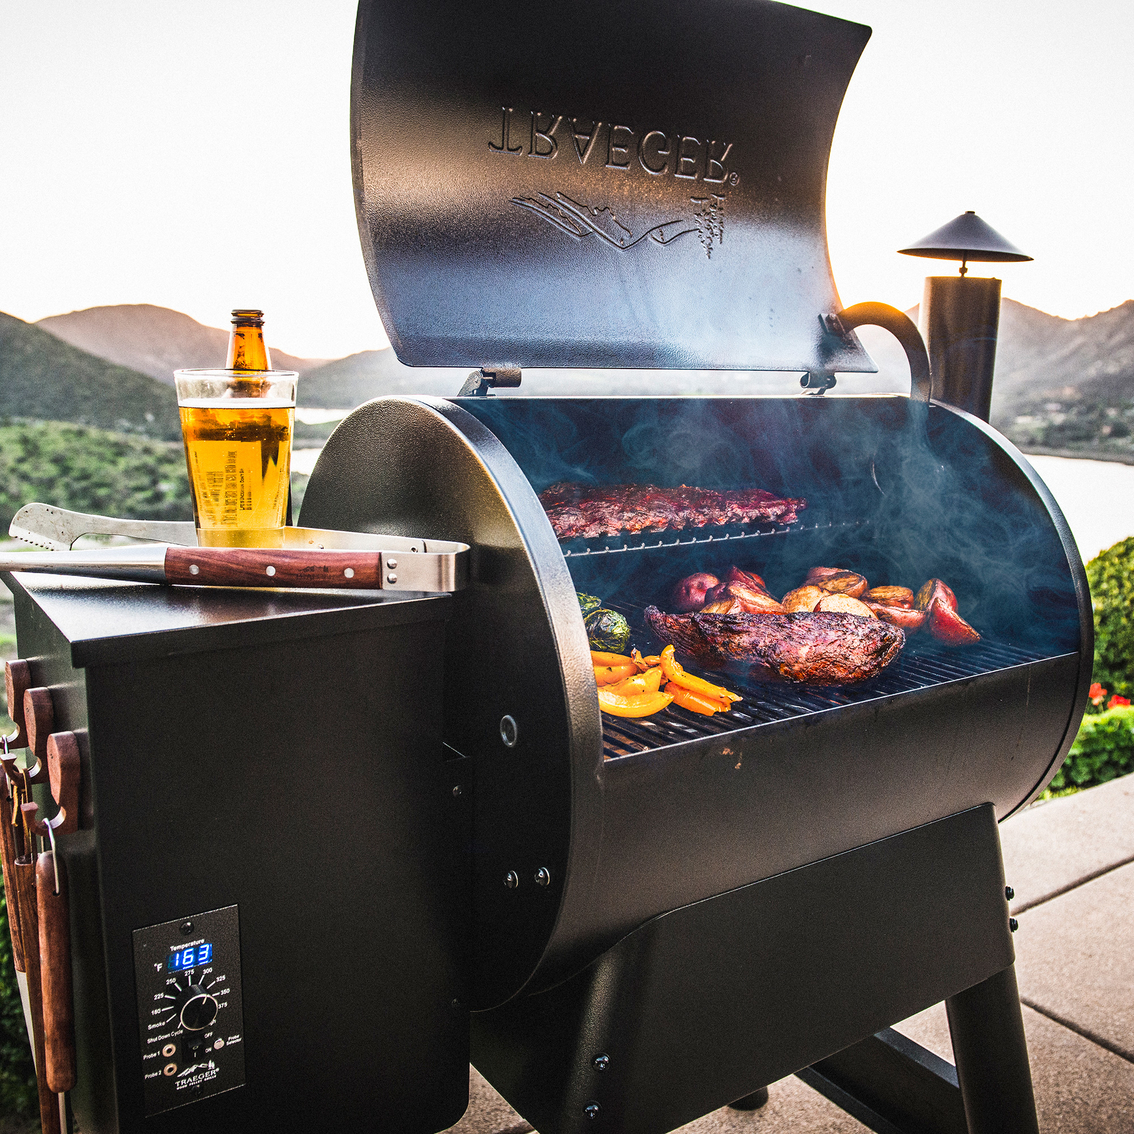 Traeger Pro 22 Bronze Grill - Image 7 of 7